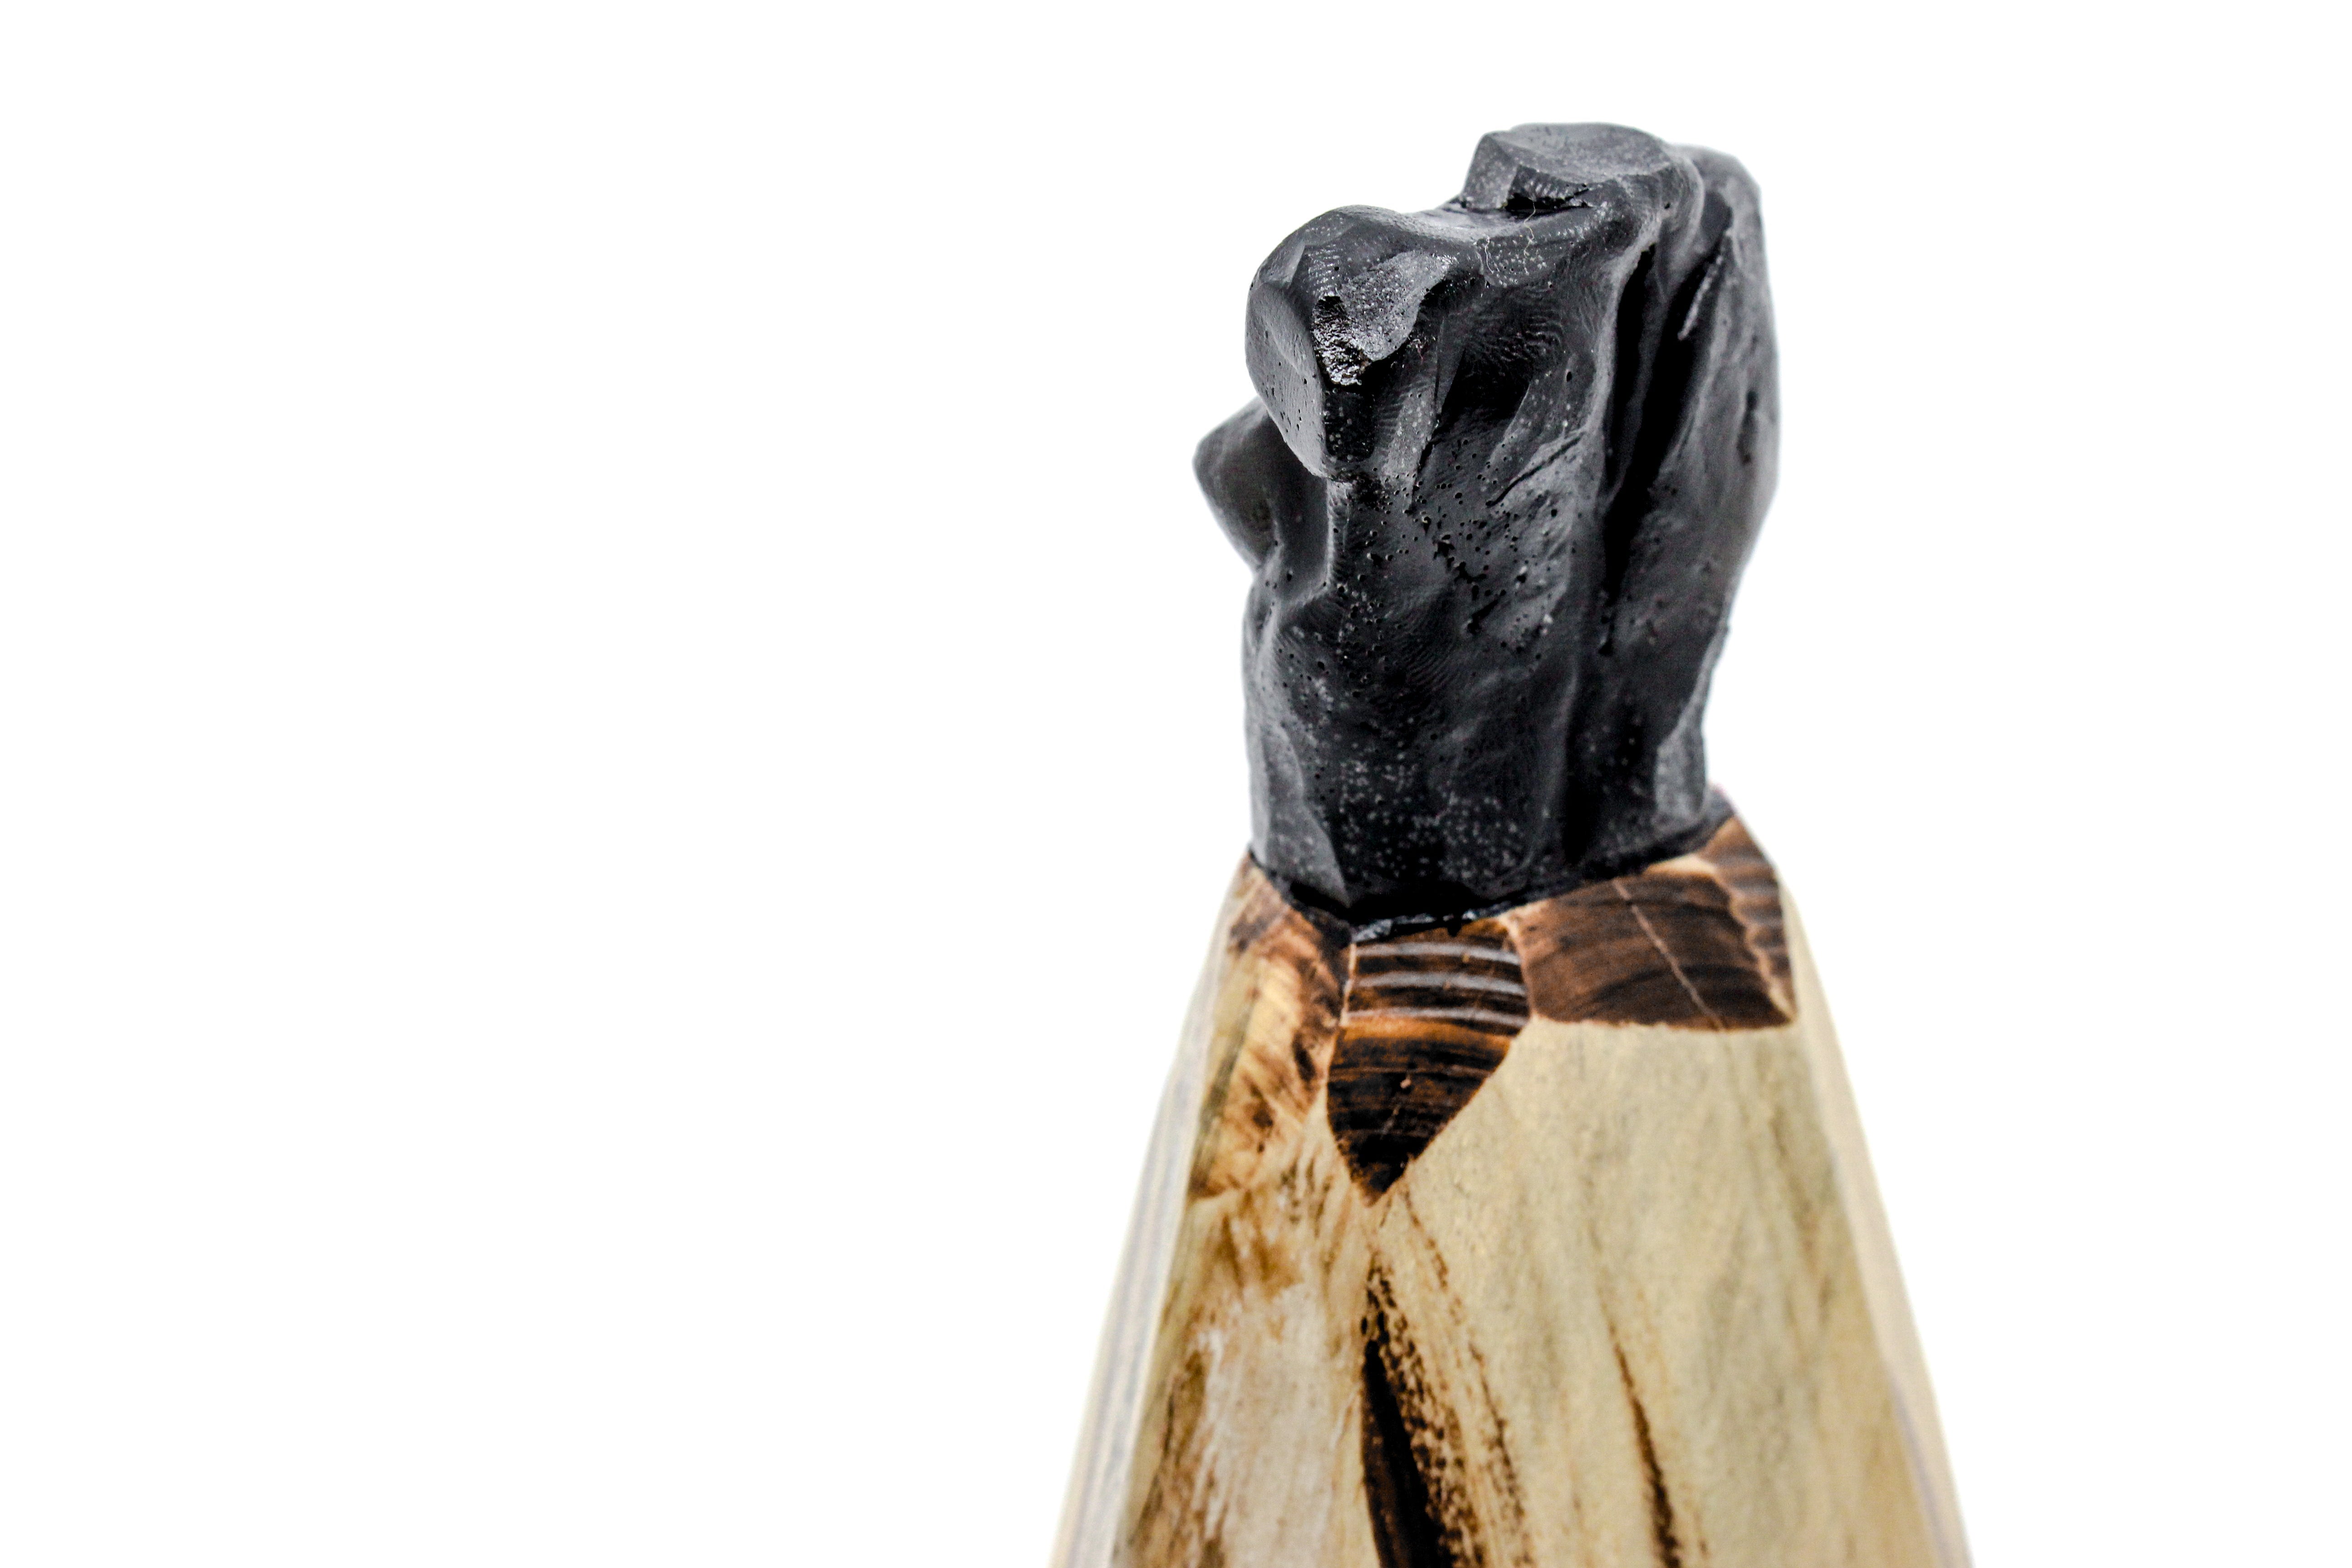 January Two Resin and Wood Torso Statuette